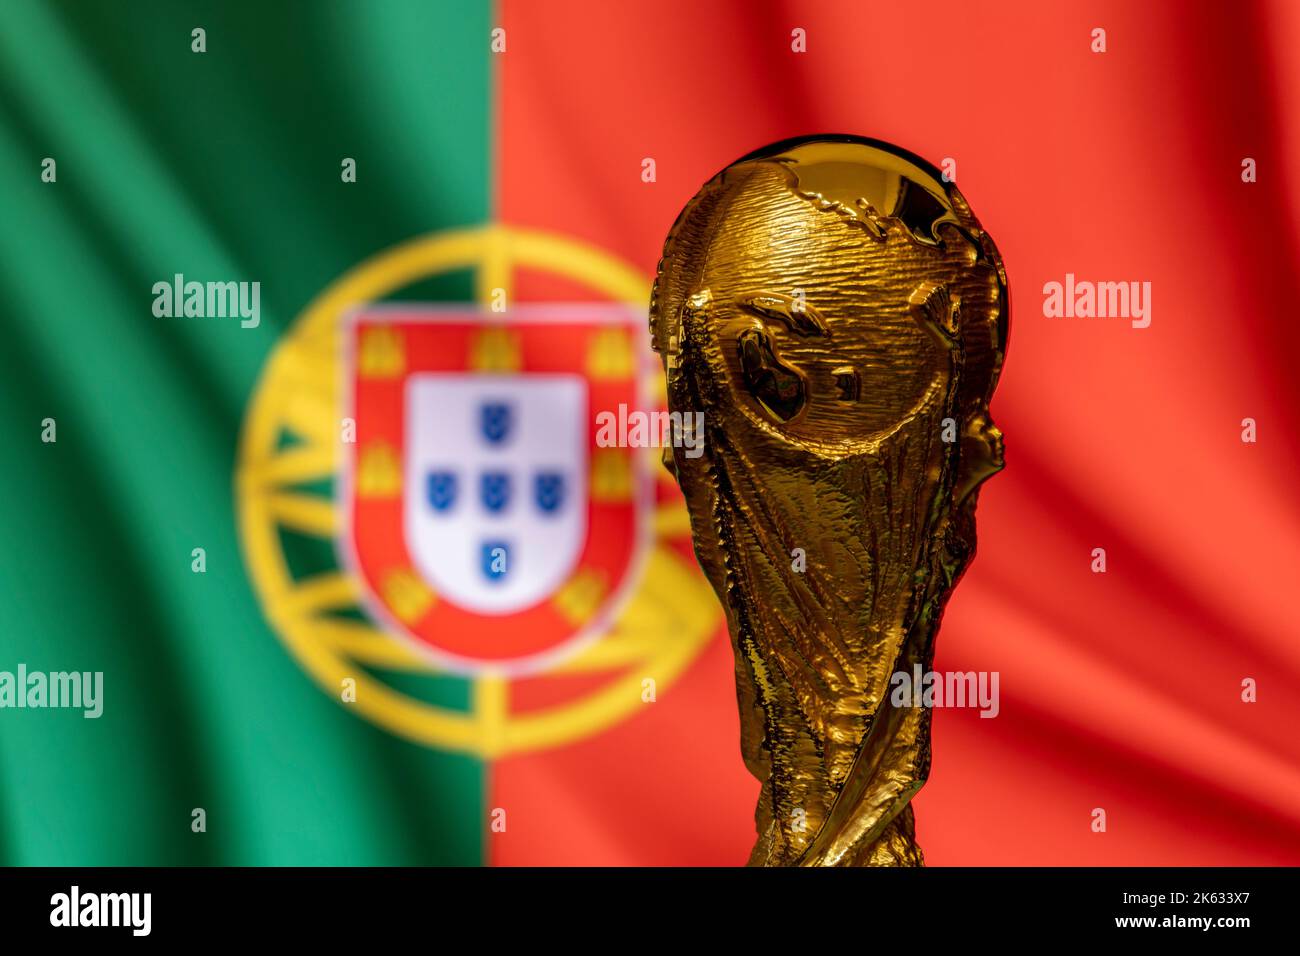 2018 World Cup draw: Spain and Portugal in same group; Mexico paired with  defending champion Germany – Press Enterprise